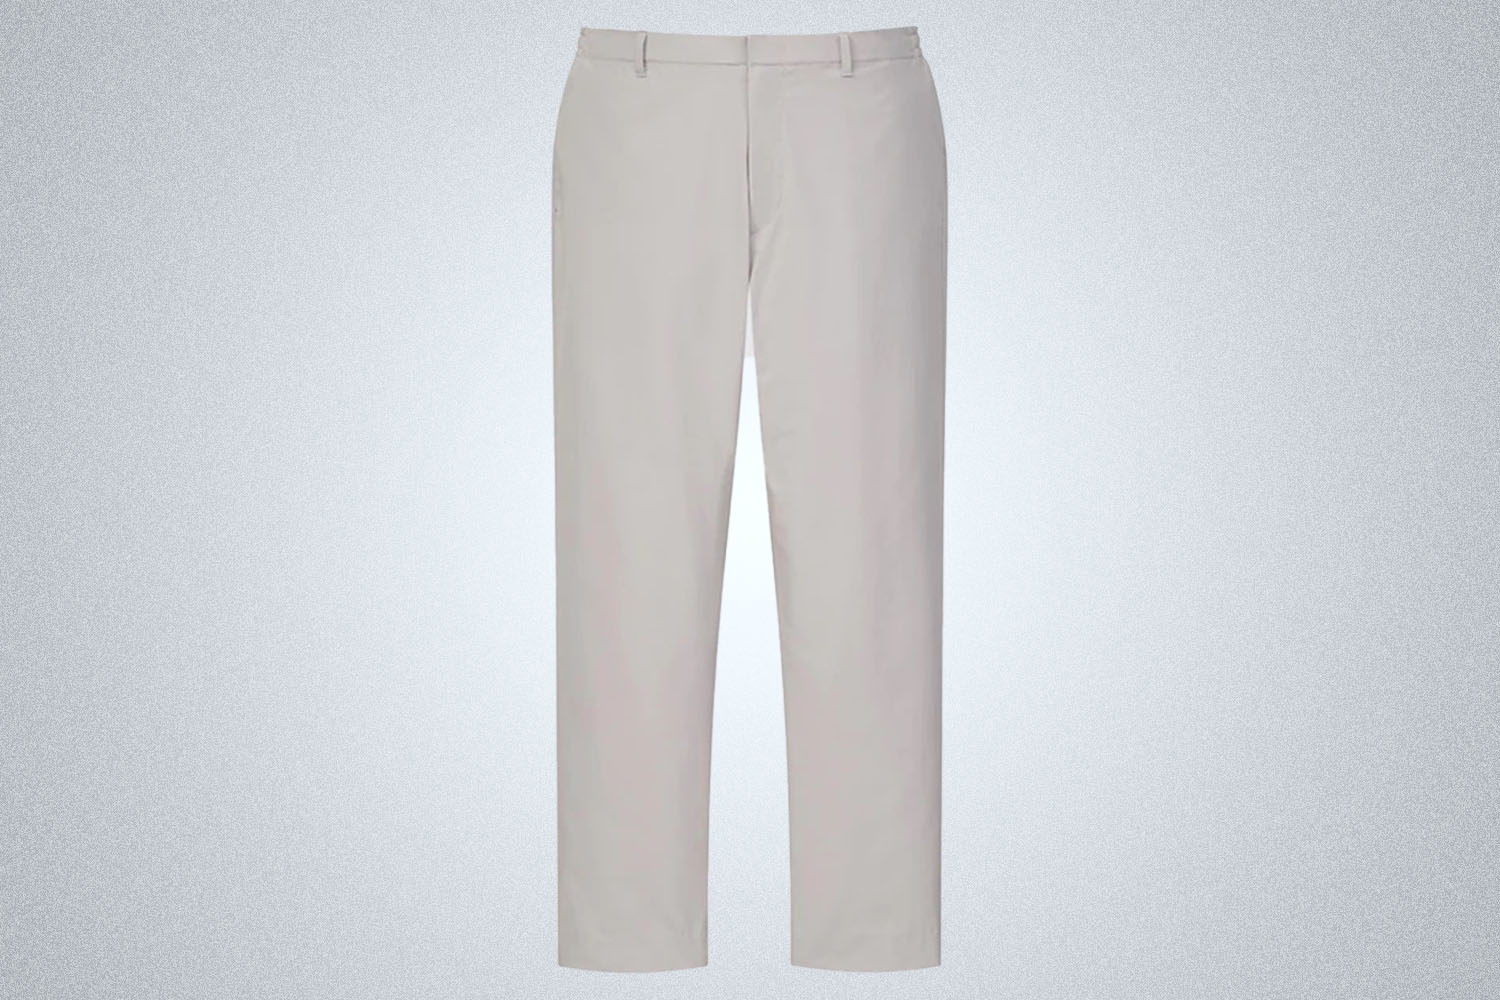 a pair of white uniqlo trousers on a grey background